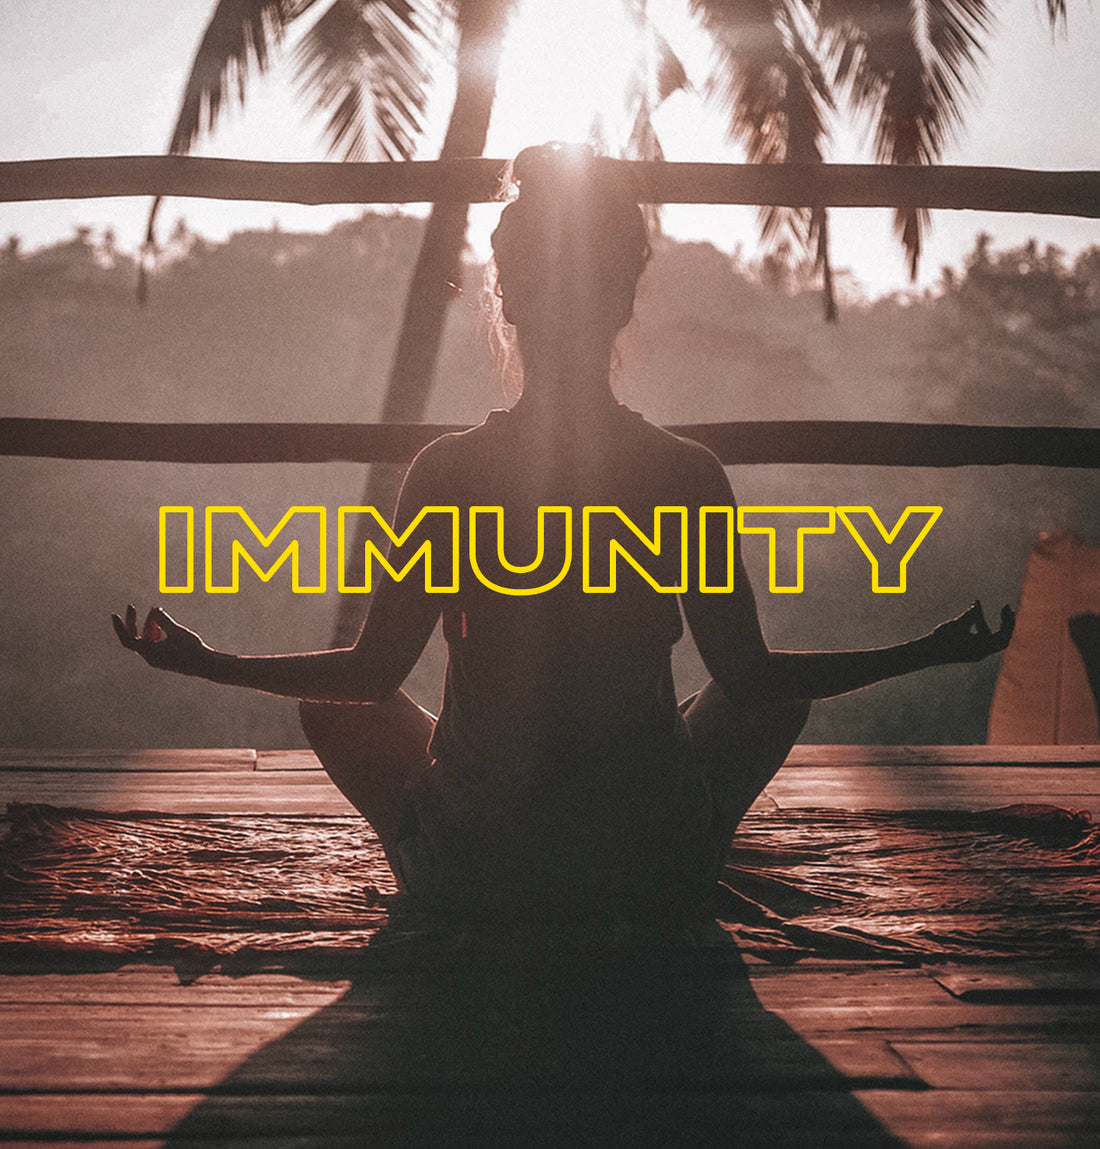 Let's Talk About Immunity